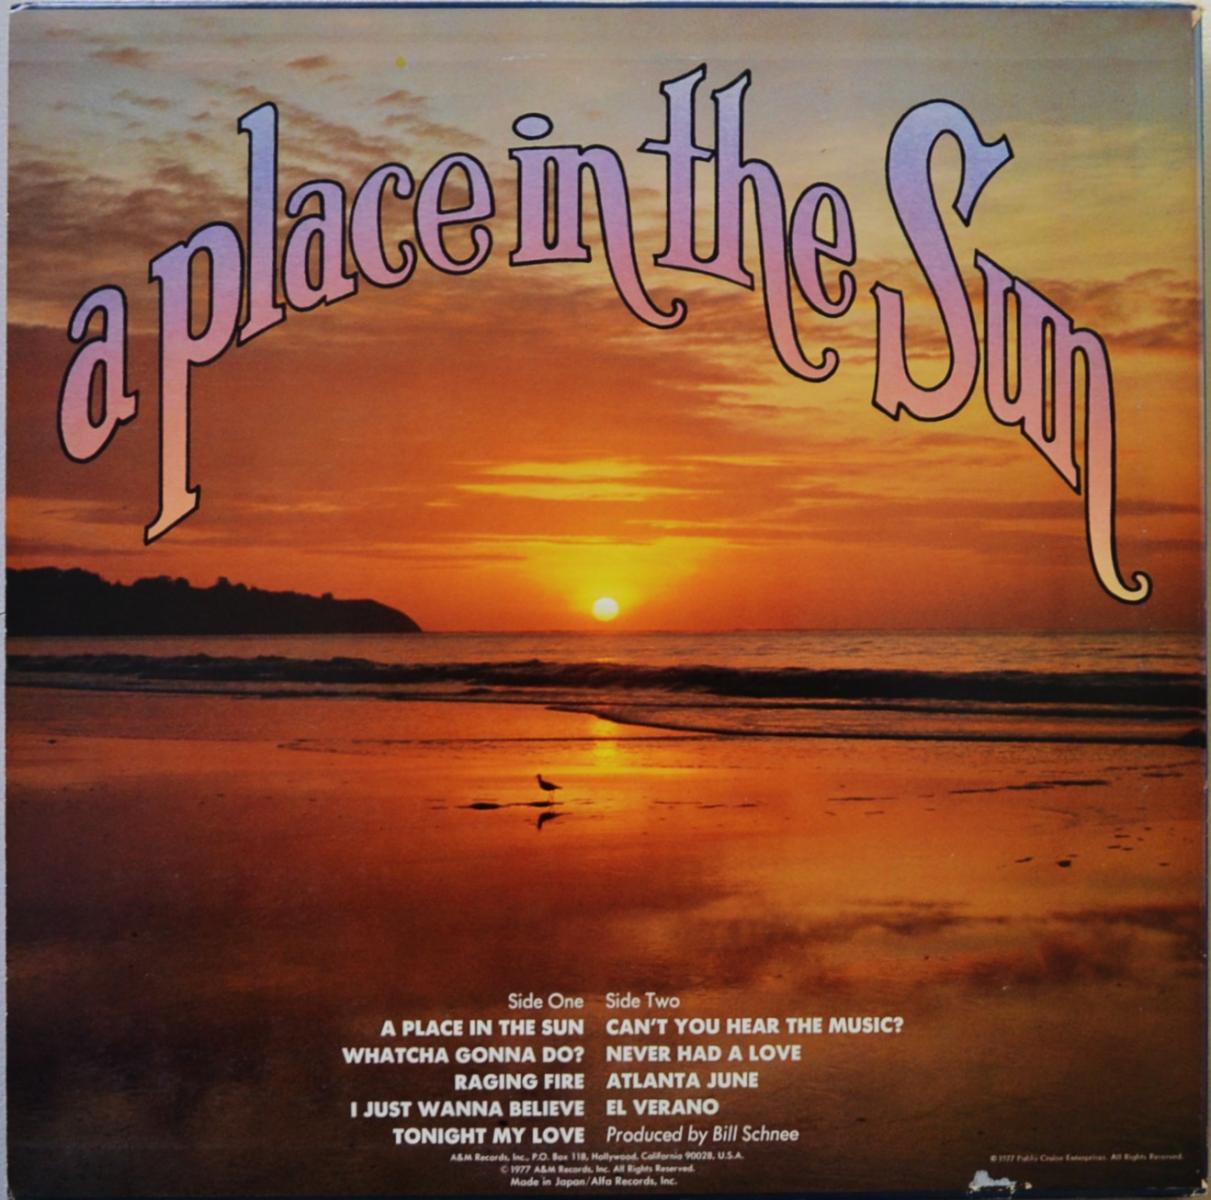 pablo cruise place in the sun